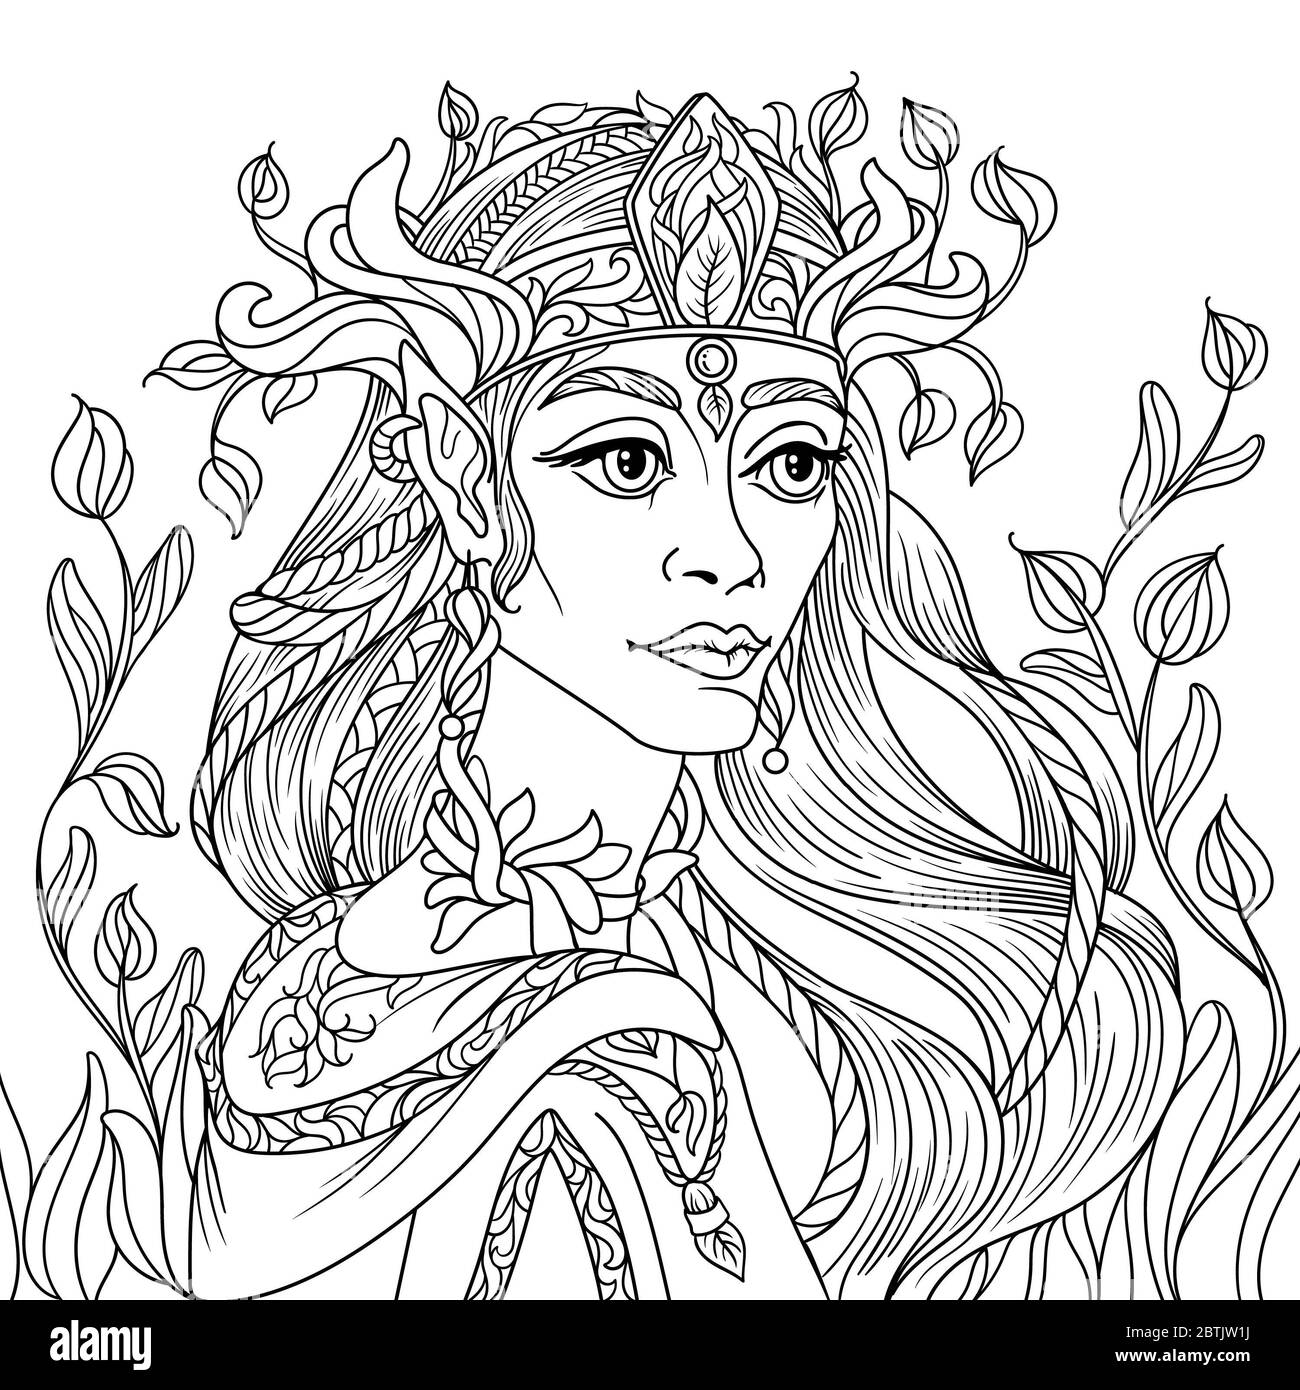 ACOTAR Coloring Book for Fan Men Teen Women Kid: 50+ Great Coloring Pages  For Kids, Teens, Adults. Beautiful And Exclusive Illustrations Of Your  Favorite Characters To Express Your Creativity And Create Your